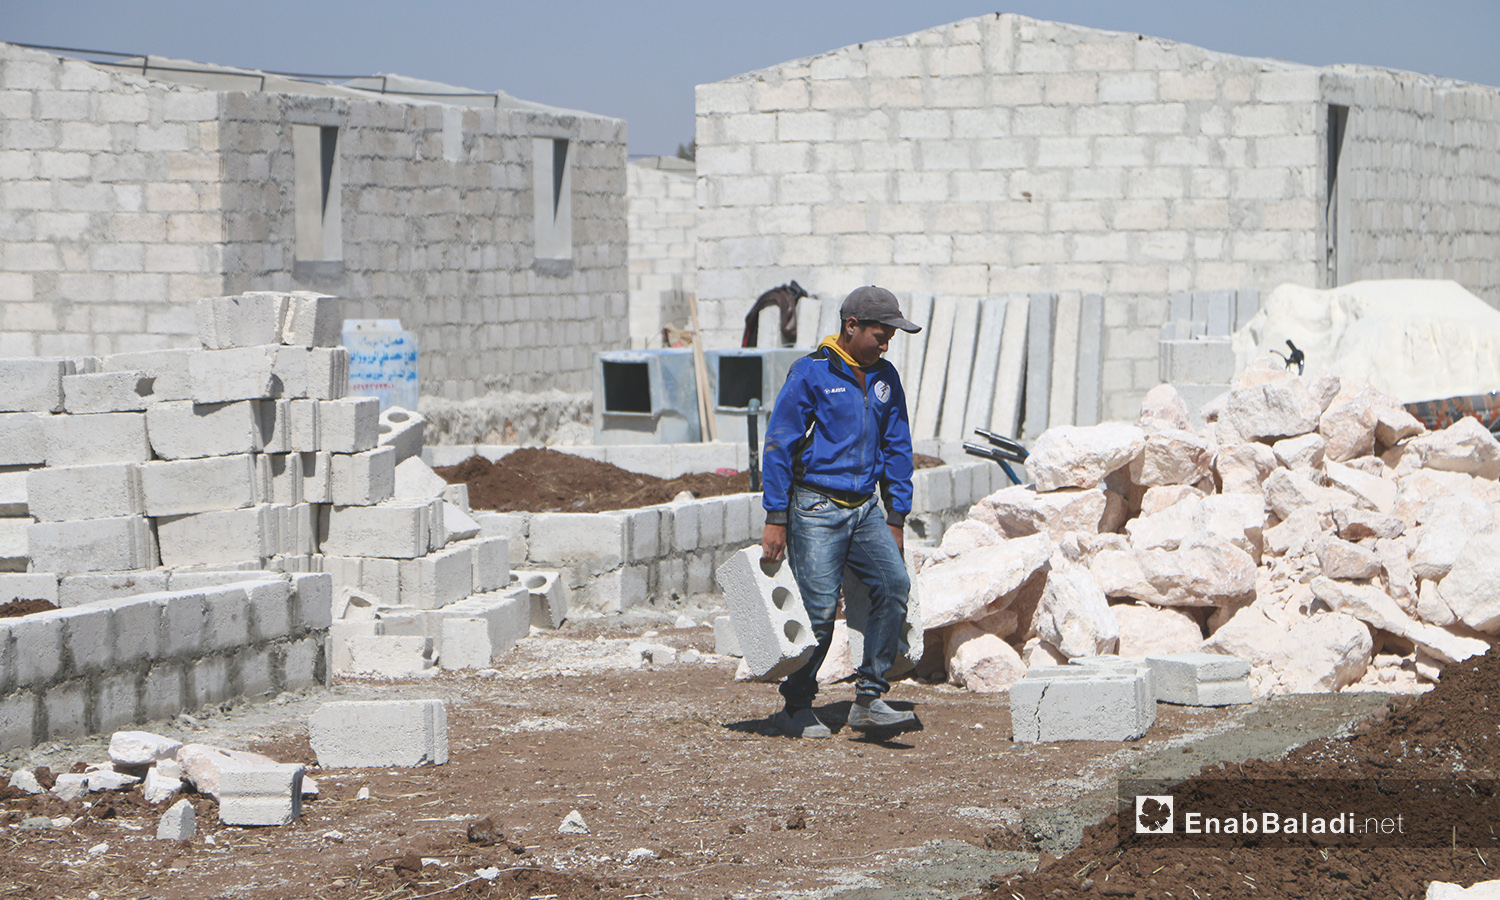 A construction worker of the concrete housing units